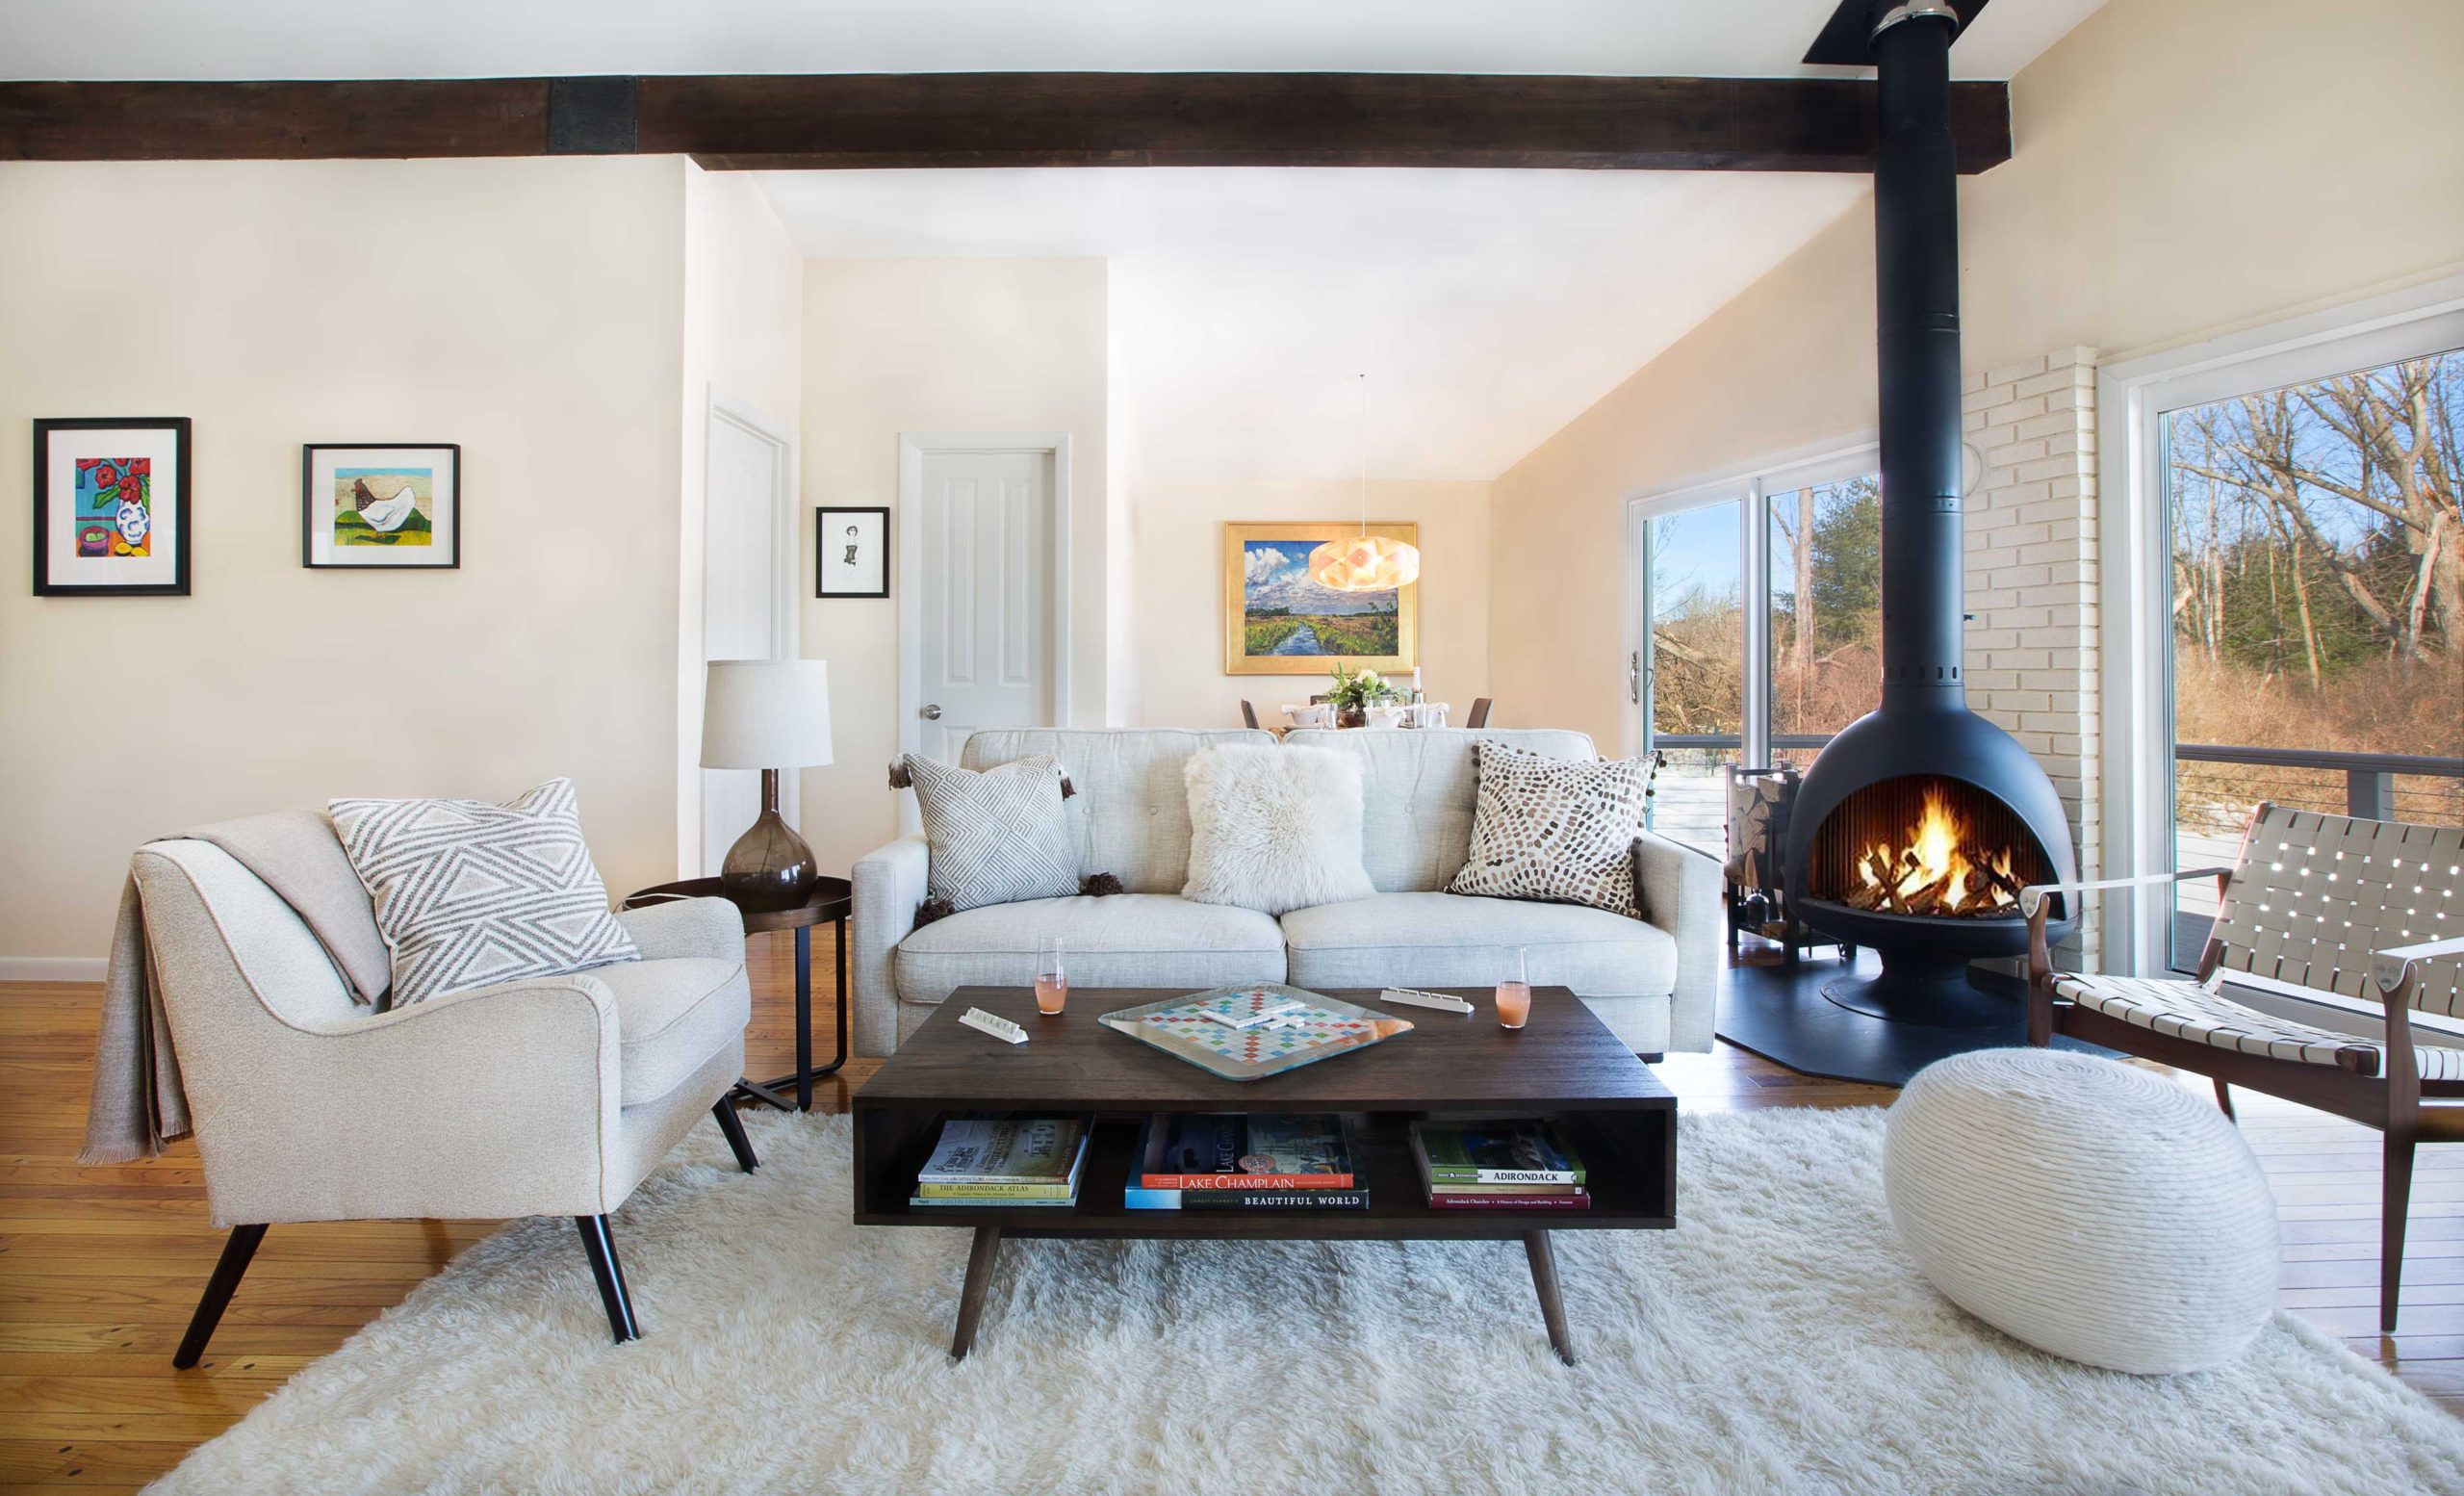 Settle in with a fire, a book, a movie, a game, a cozy conversation, or a home-cooked meal.